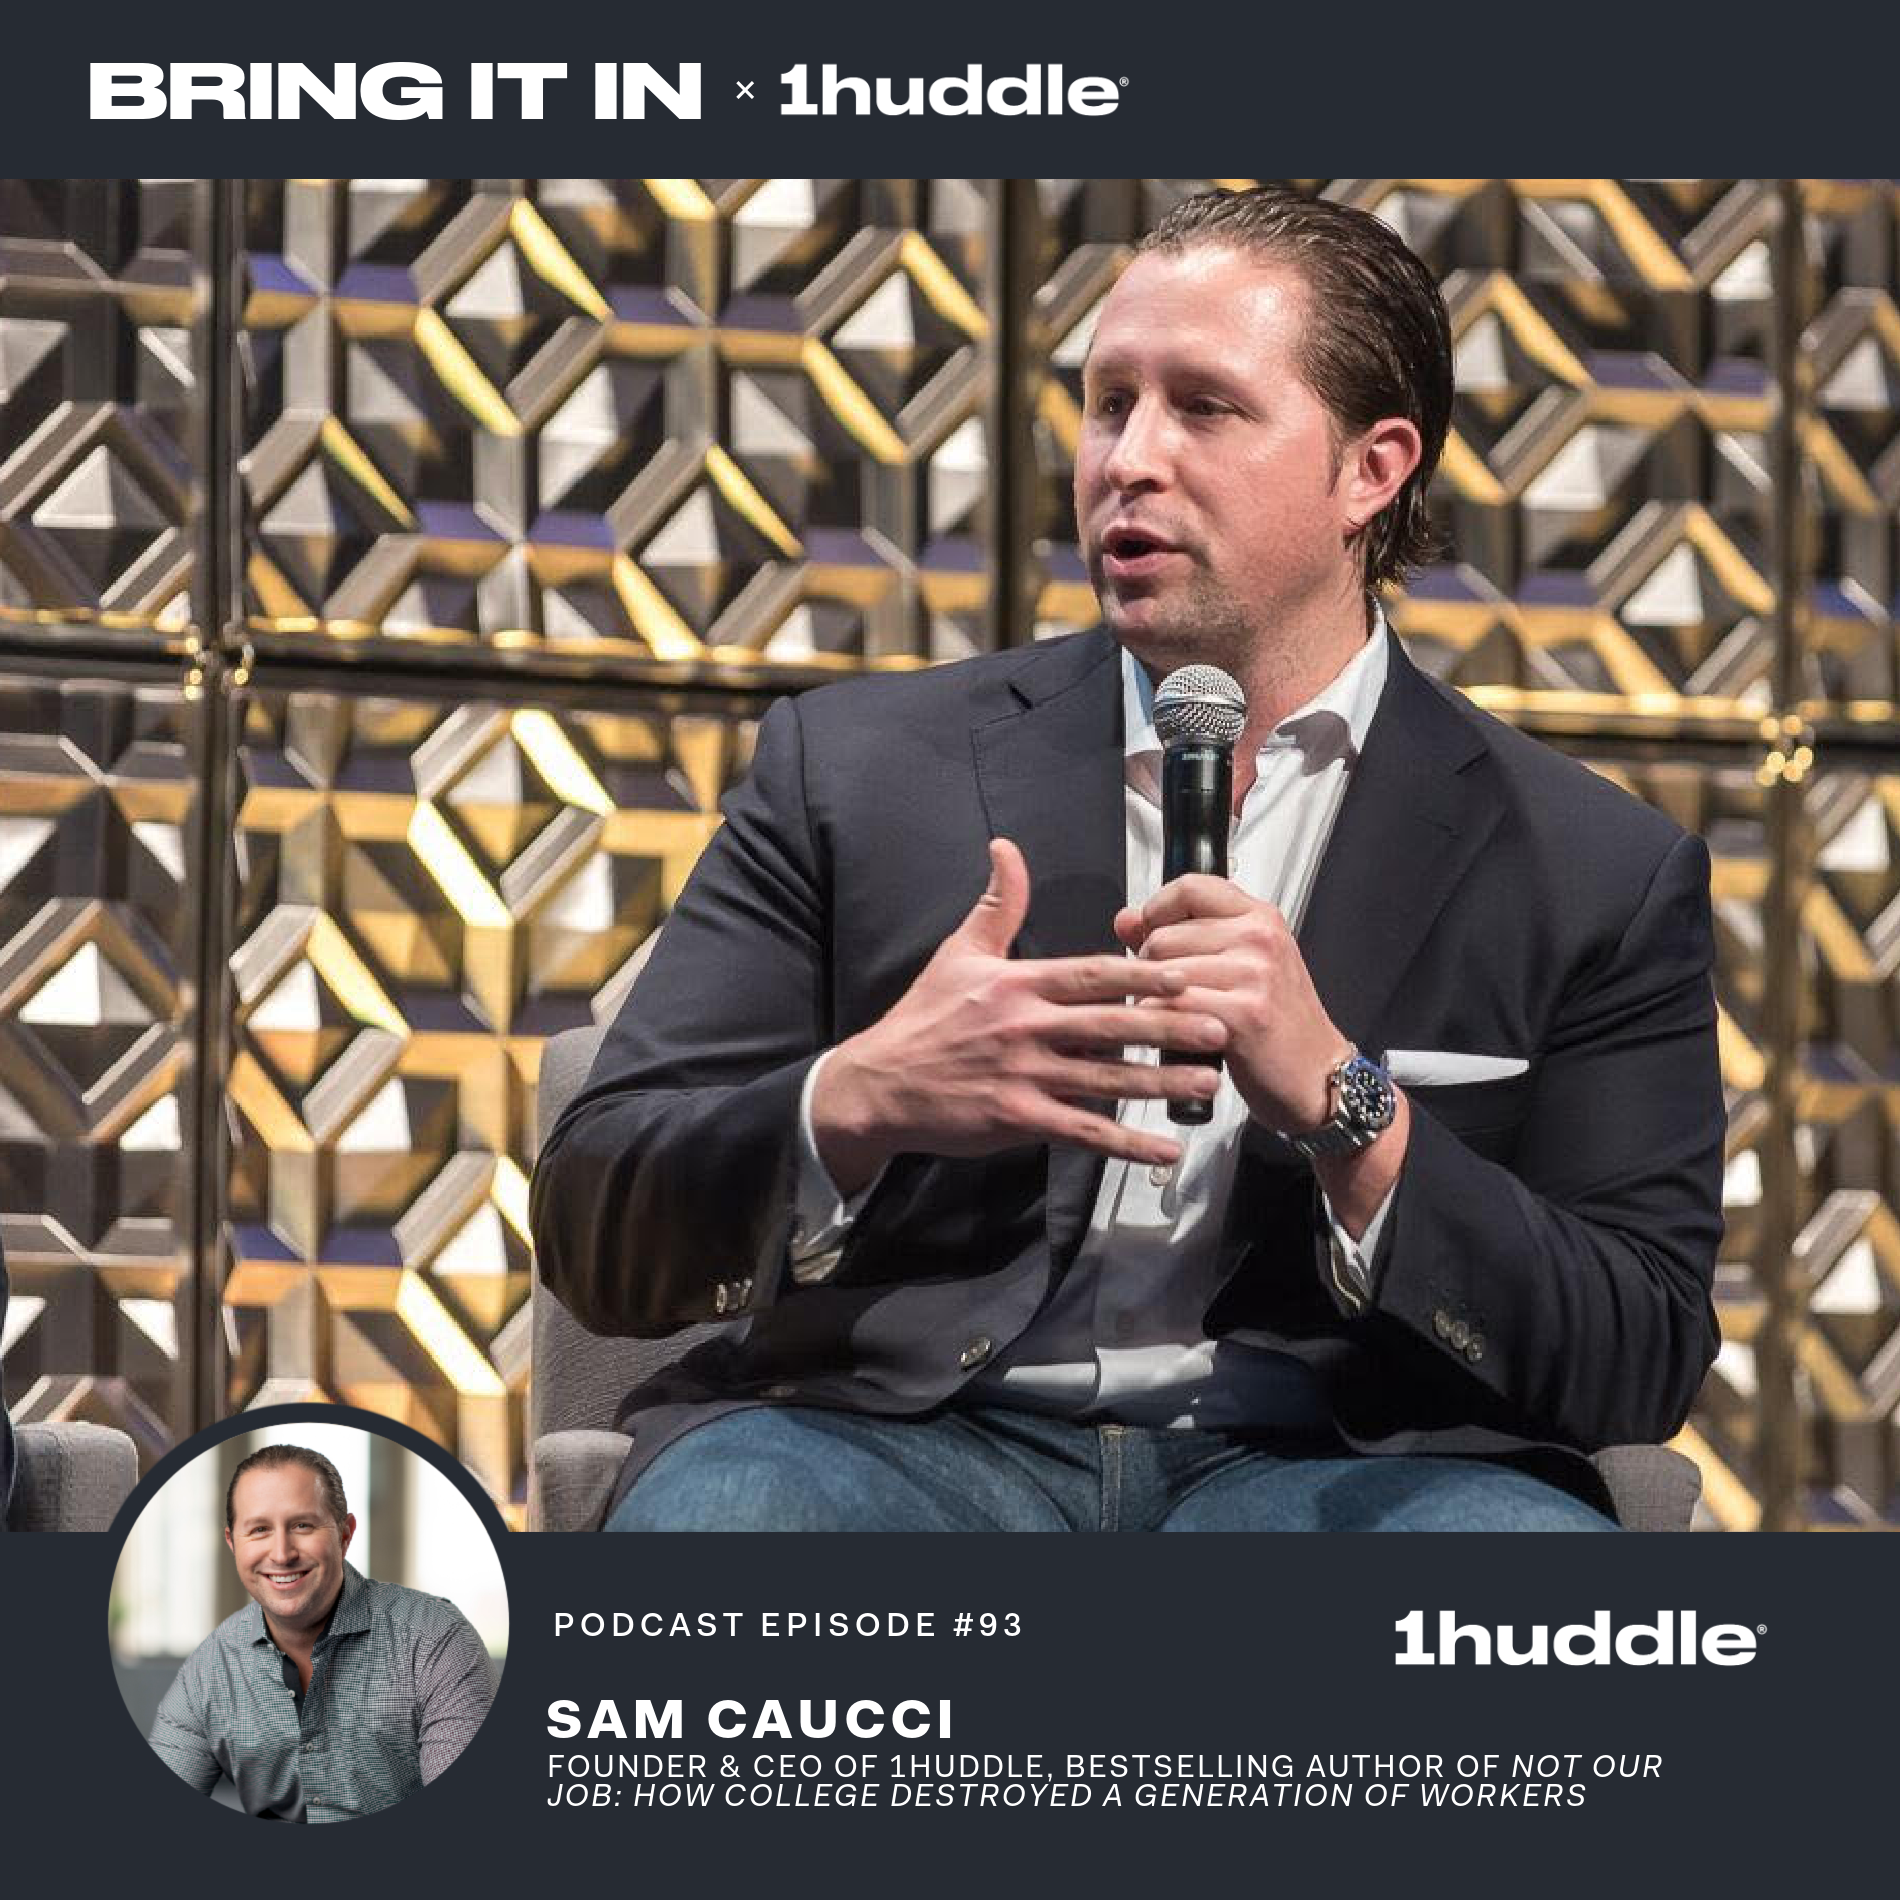 Sam Caucci, Founder & CEO of 1Huddle, Thought Leader, Executive Coach, Keynote Speaker, and Bestselling Author